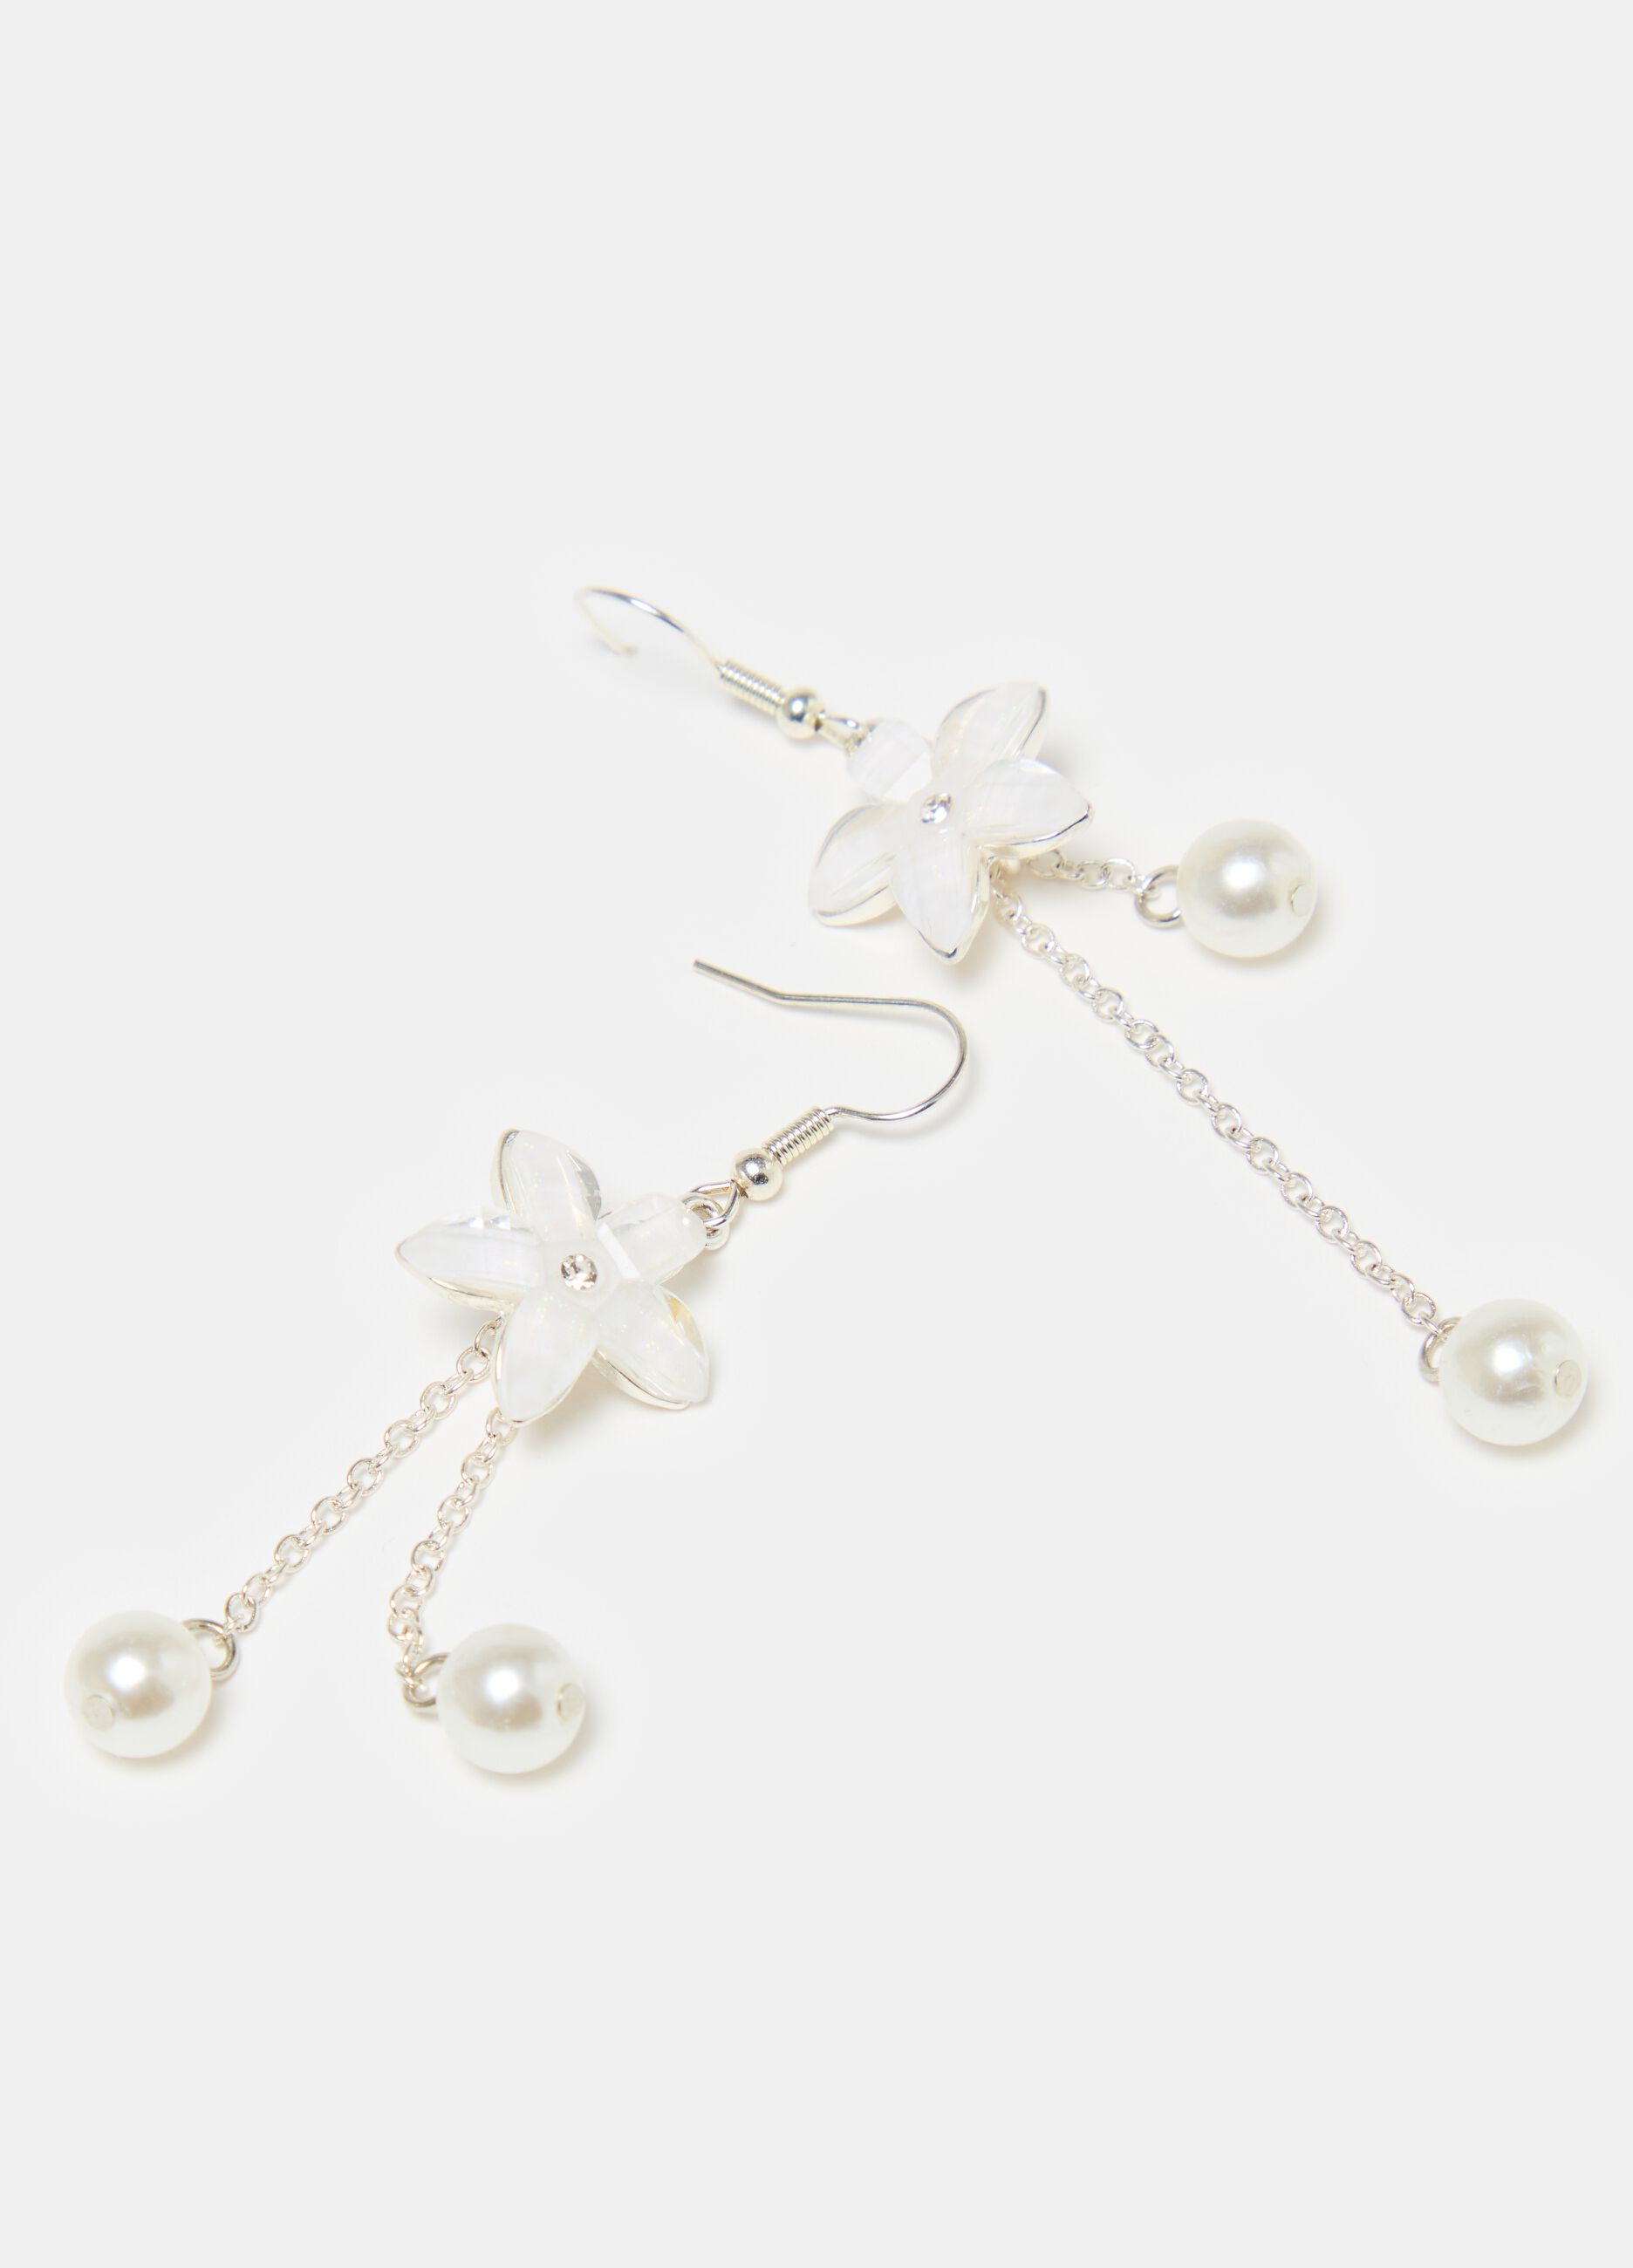 Pendant earrings with flower and pearls